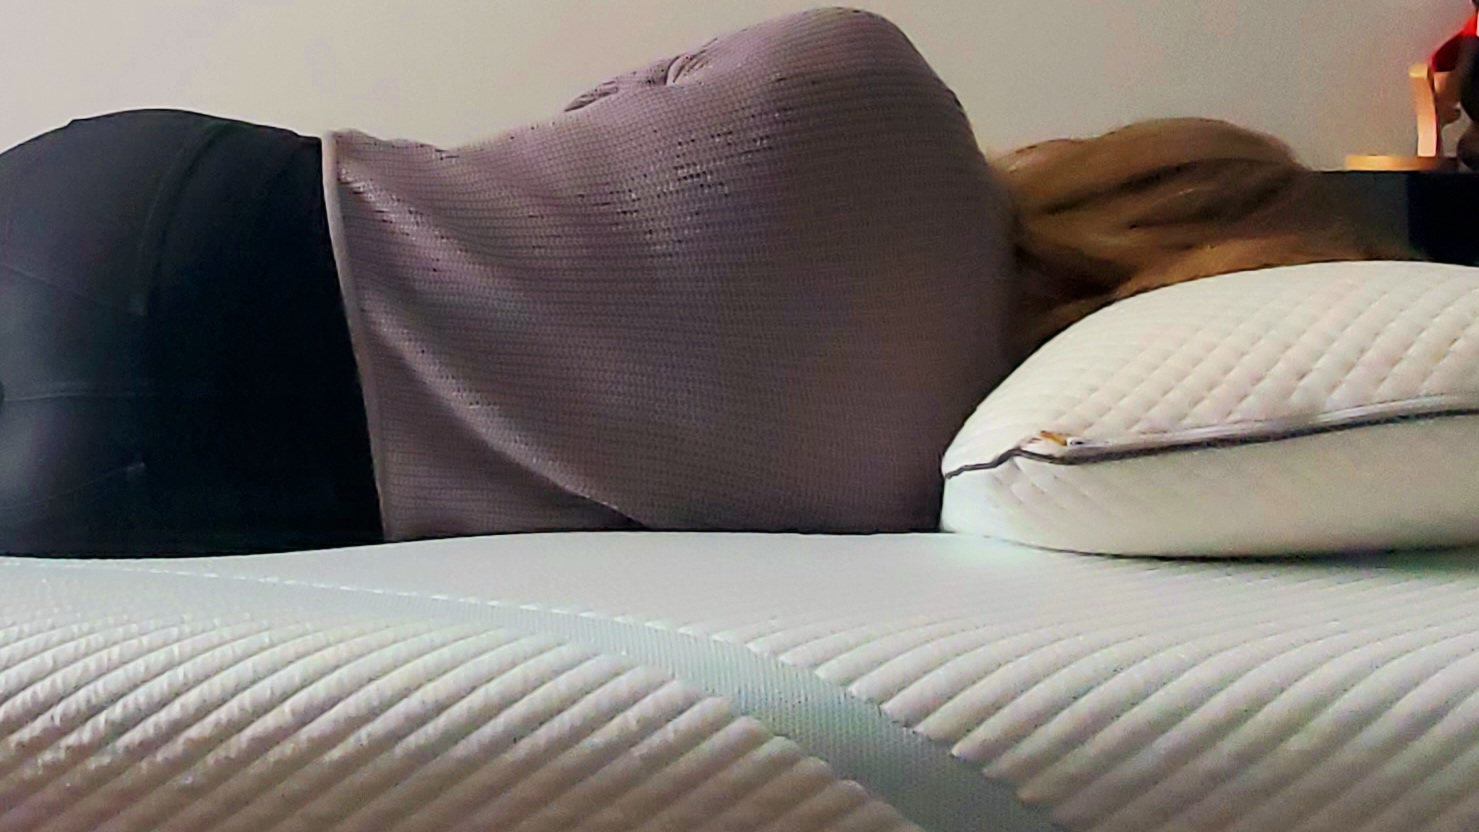 Image of our lead mattress tester, wearing a purple top and black trousers, lying on the Tempur-Pedic Tempur-Adapt mattress